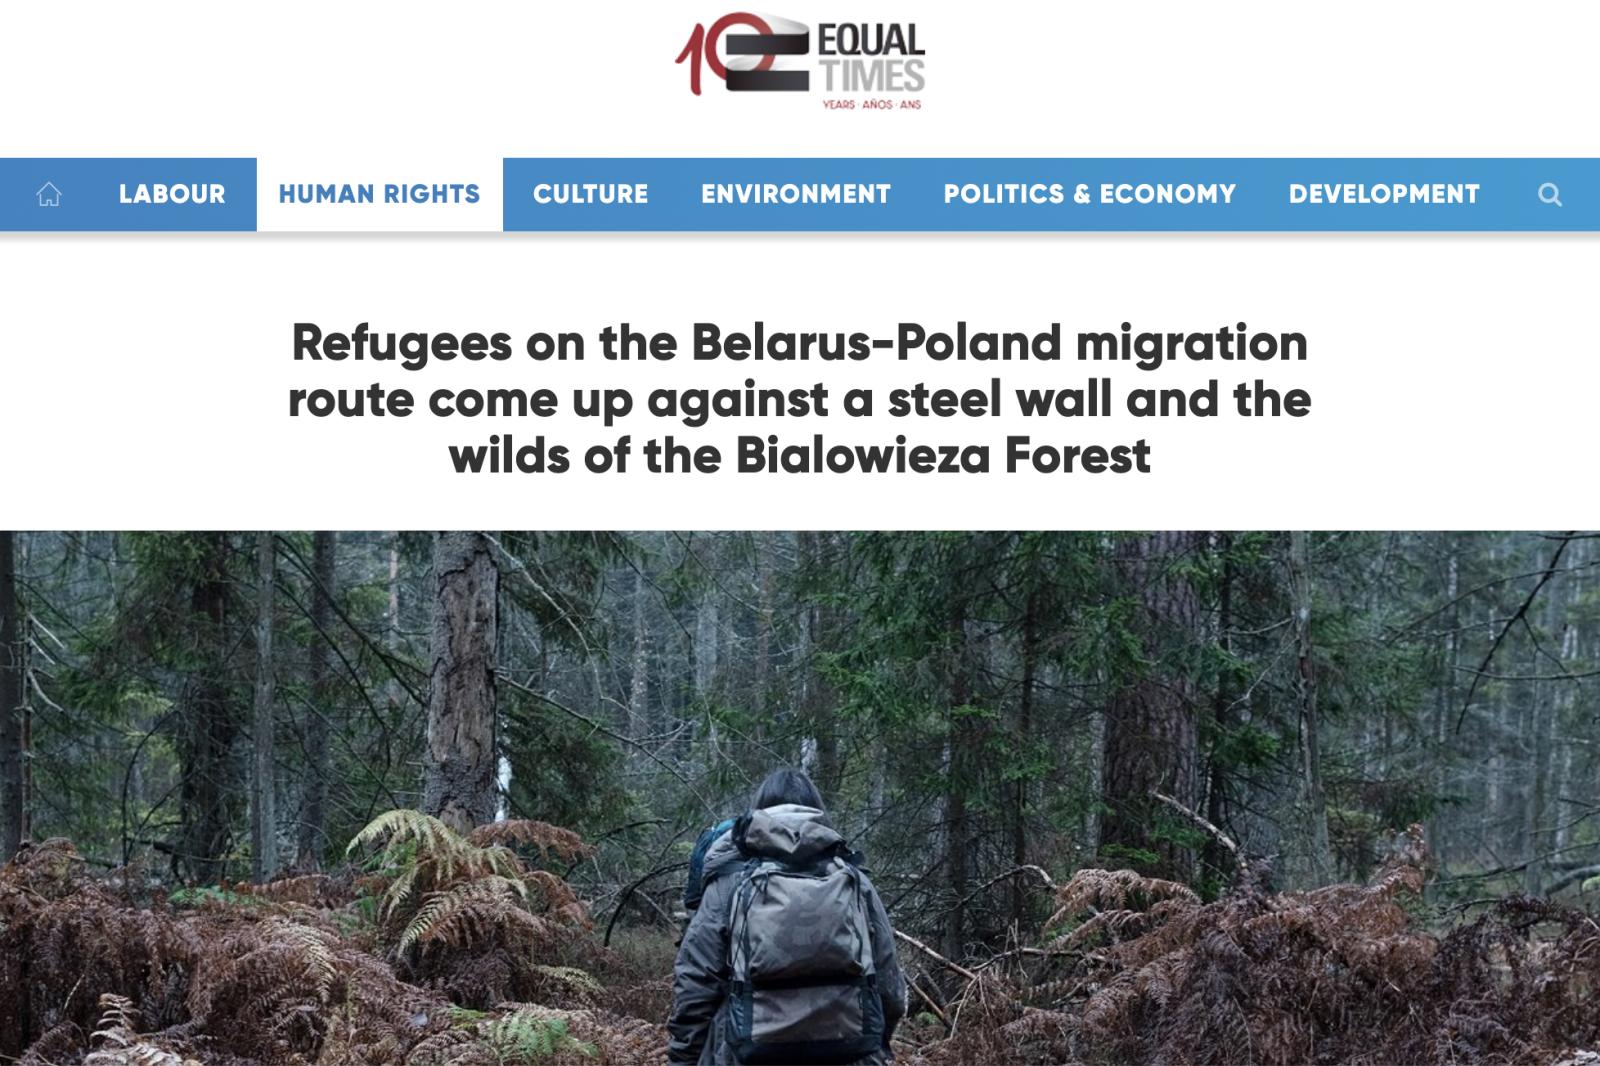 Equal Times (Belgium) publishes my reportage about refugees at the Polish-Belarusian border